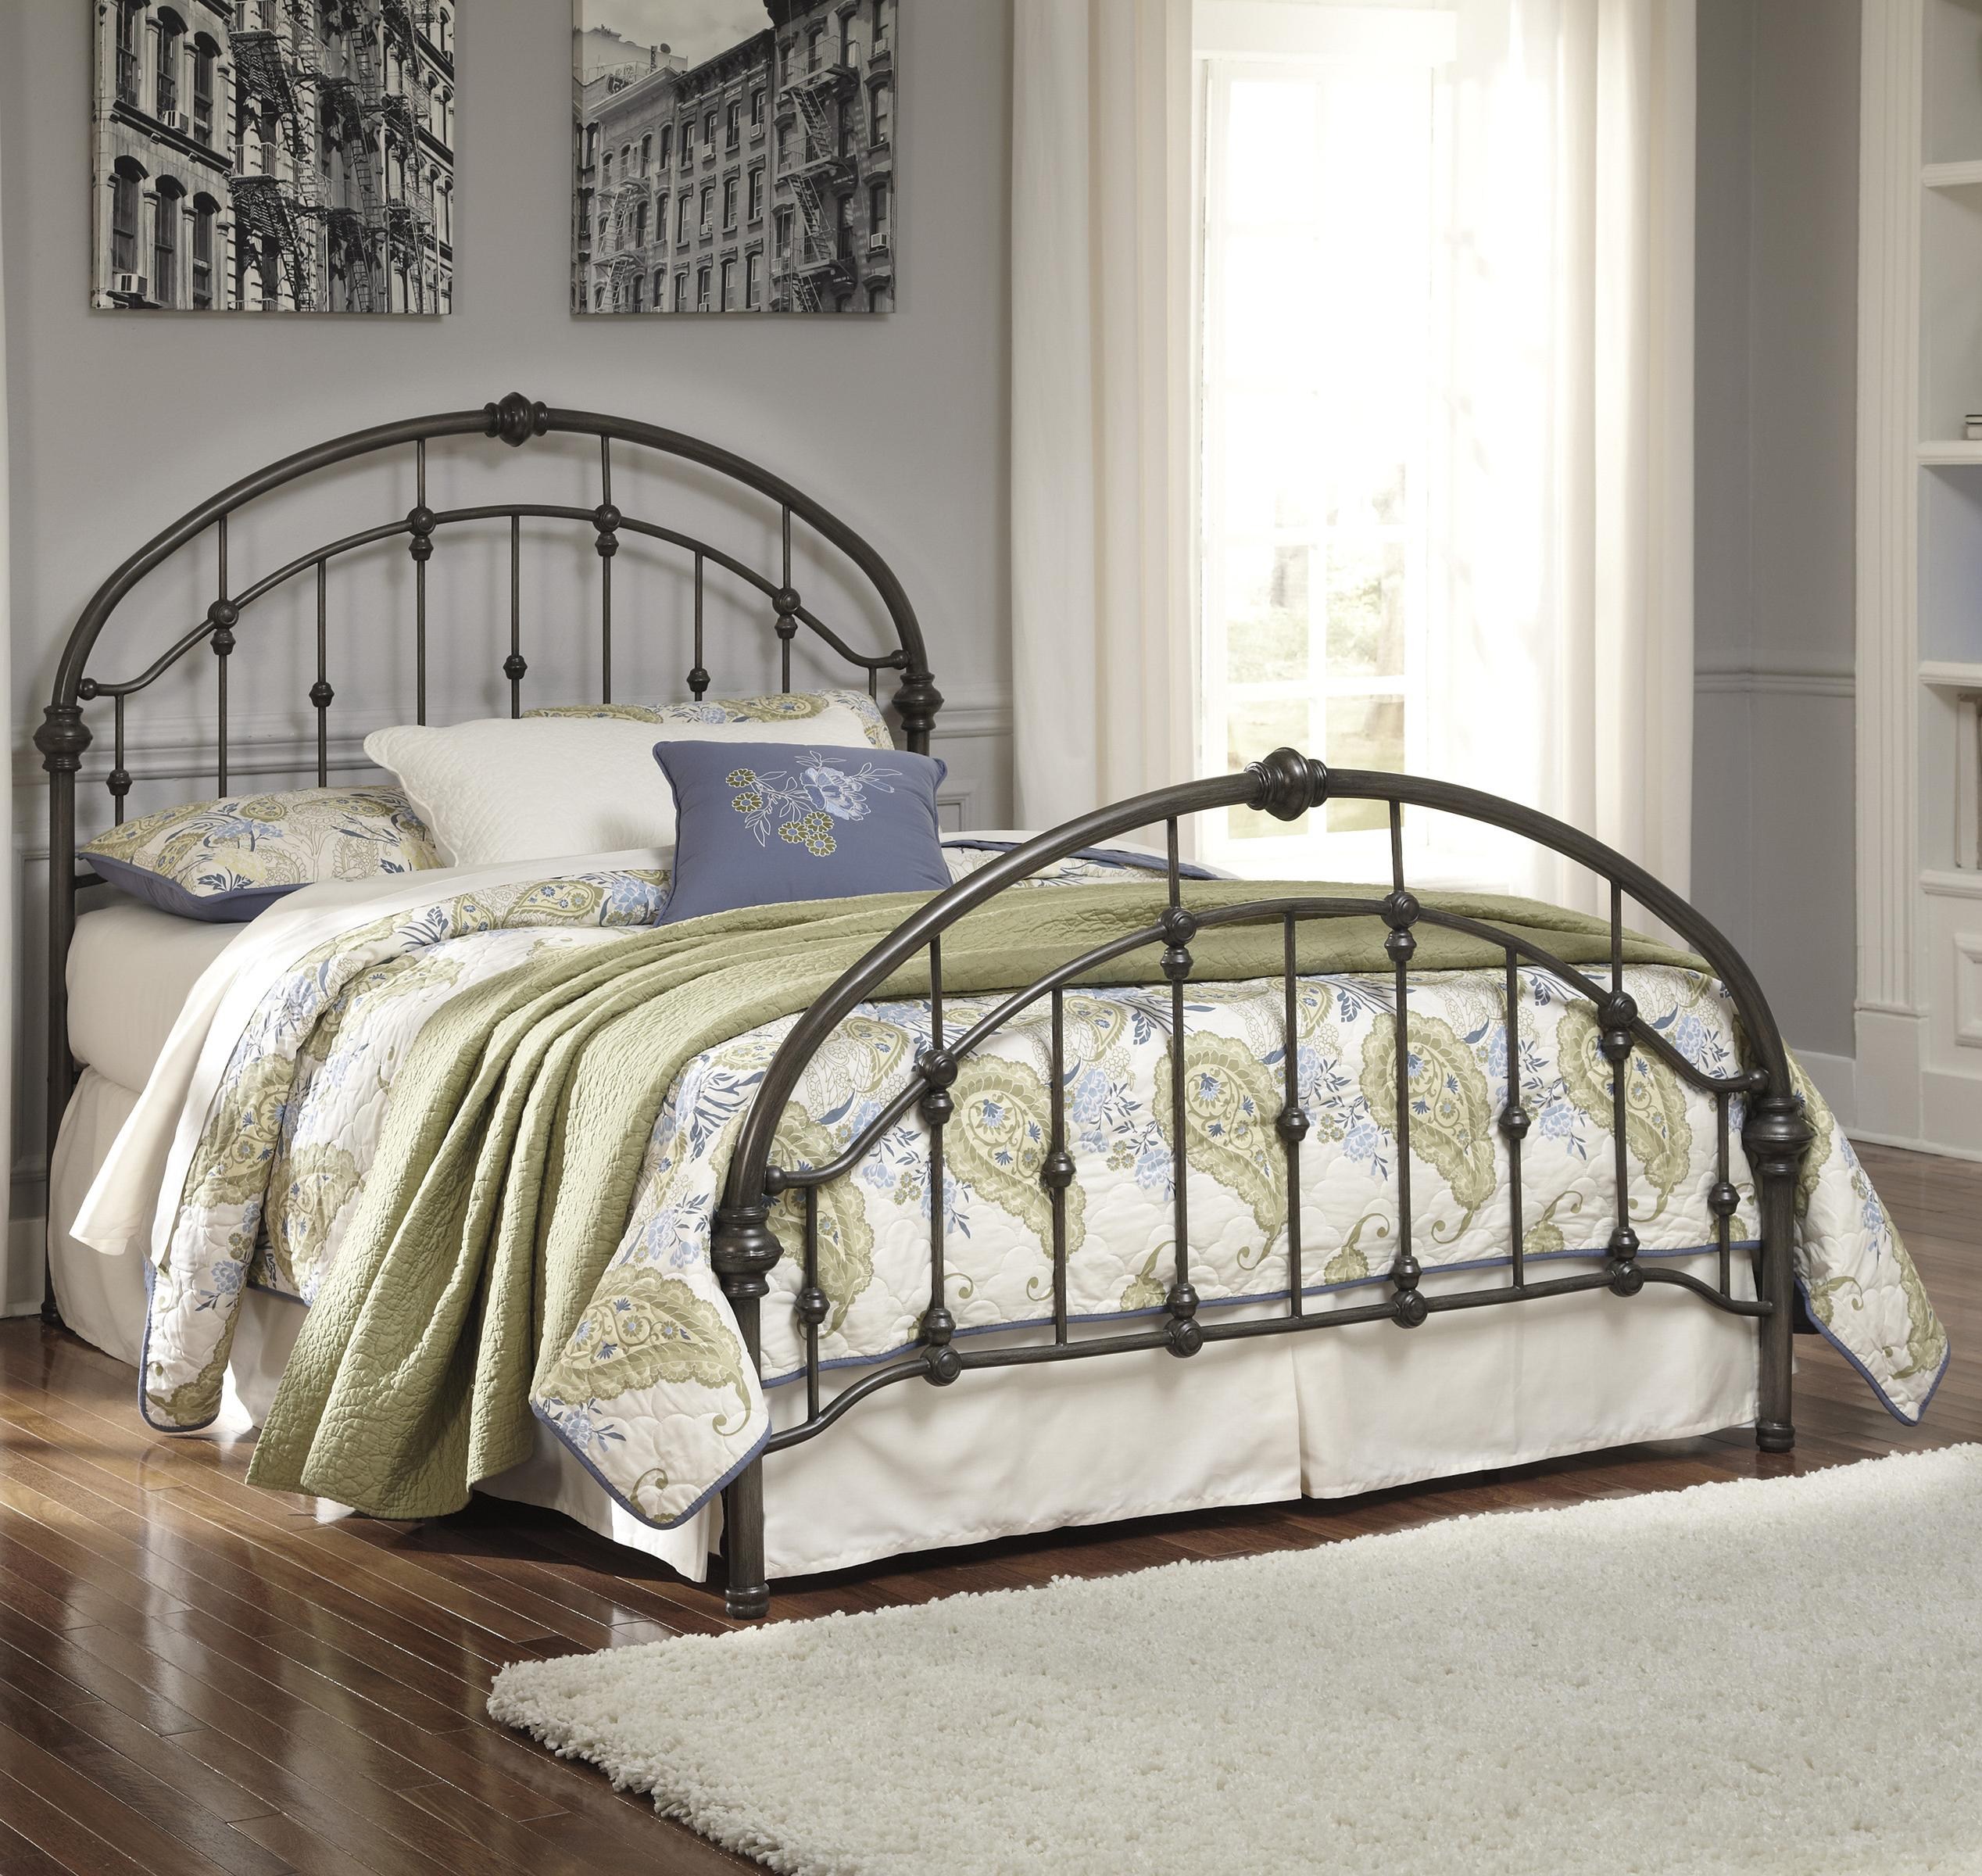 Signature Design by Ashley Nashburg Queen Arched Metal Bed in Bronze